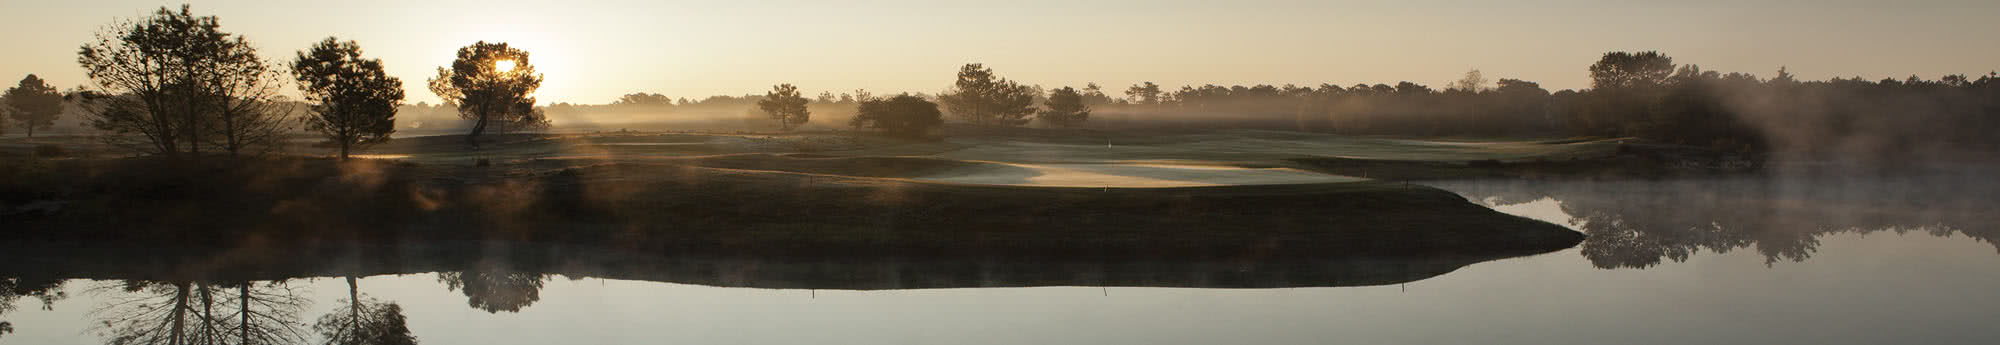 Golf course in the morning with mist and a Sunrise